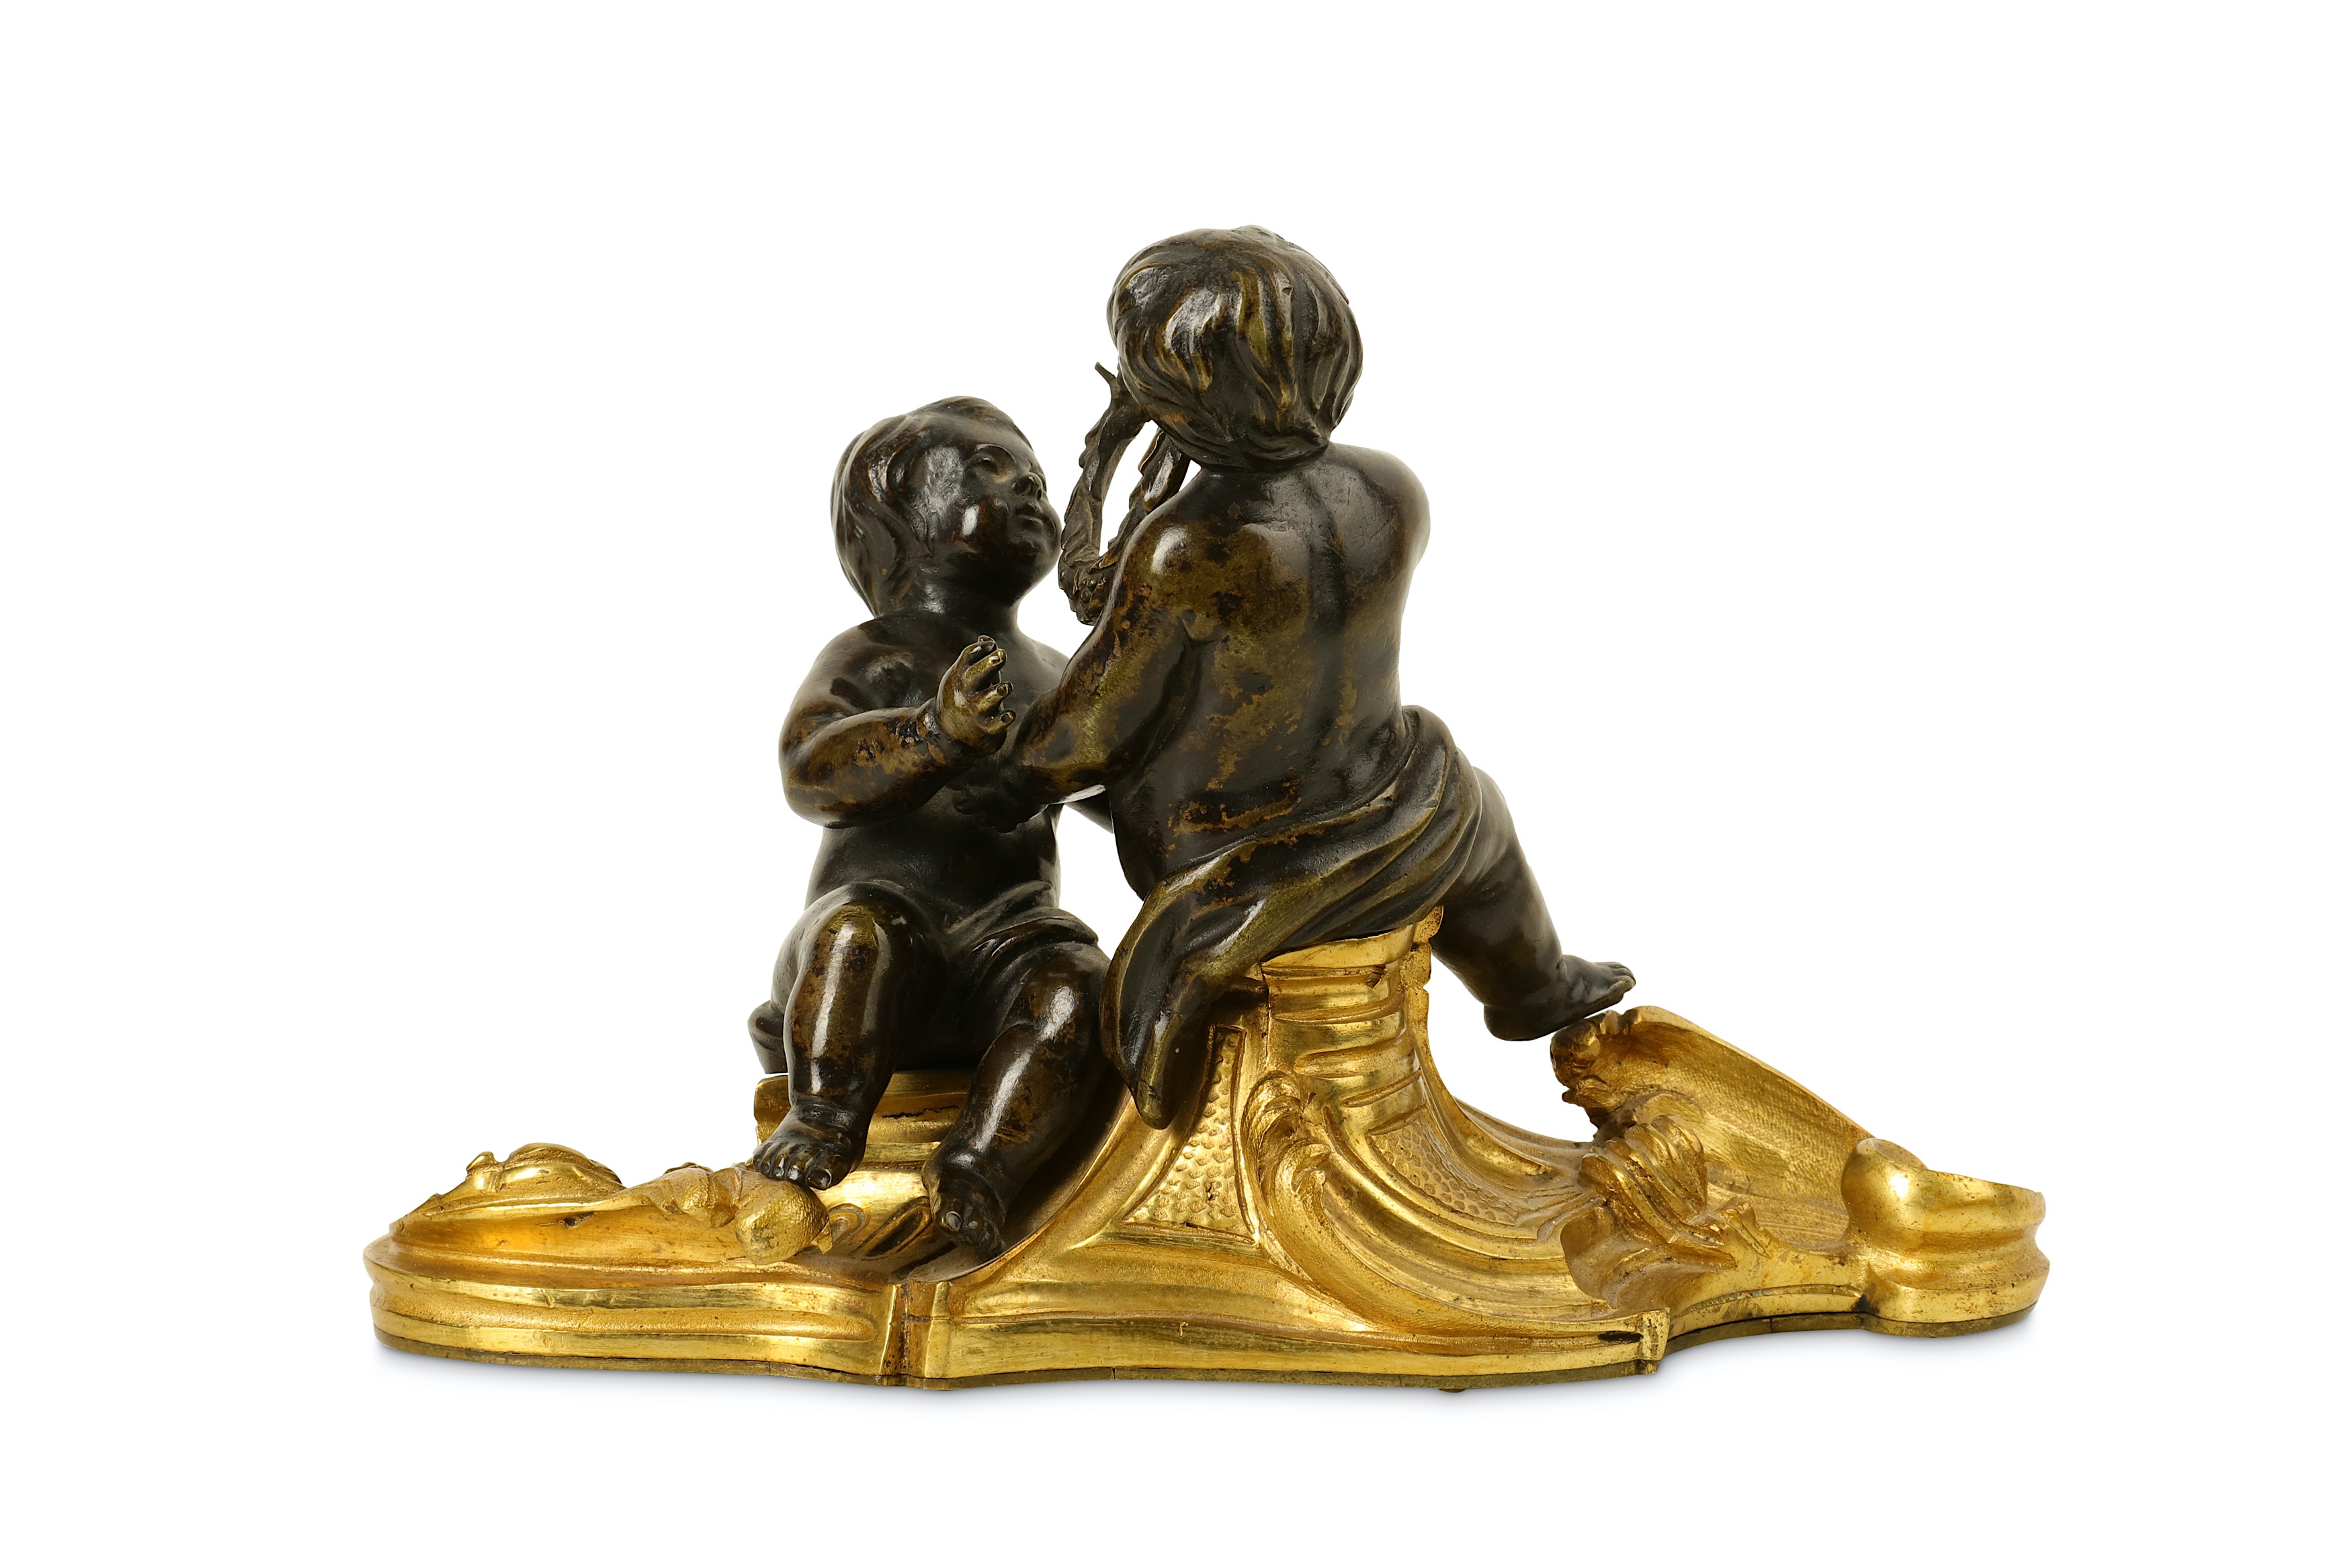 A MID 18TH CENTURY FRENCH BRONZE FIGURAL GROUP OF TWO PUTTI PLAYING WITH A WREATH mid to dark - Image 3 of 7